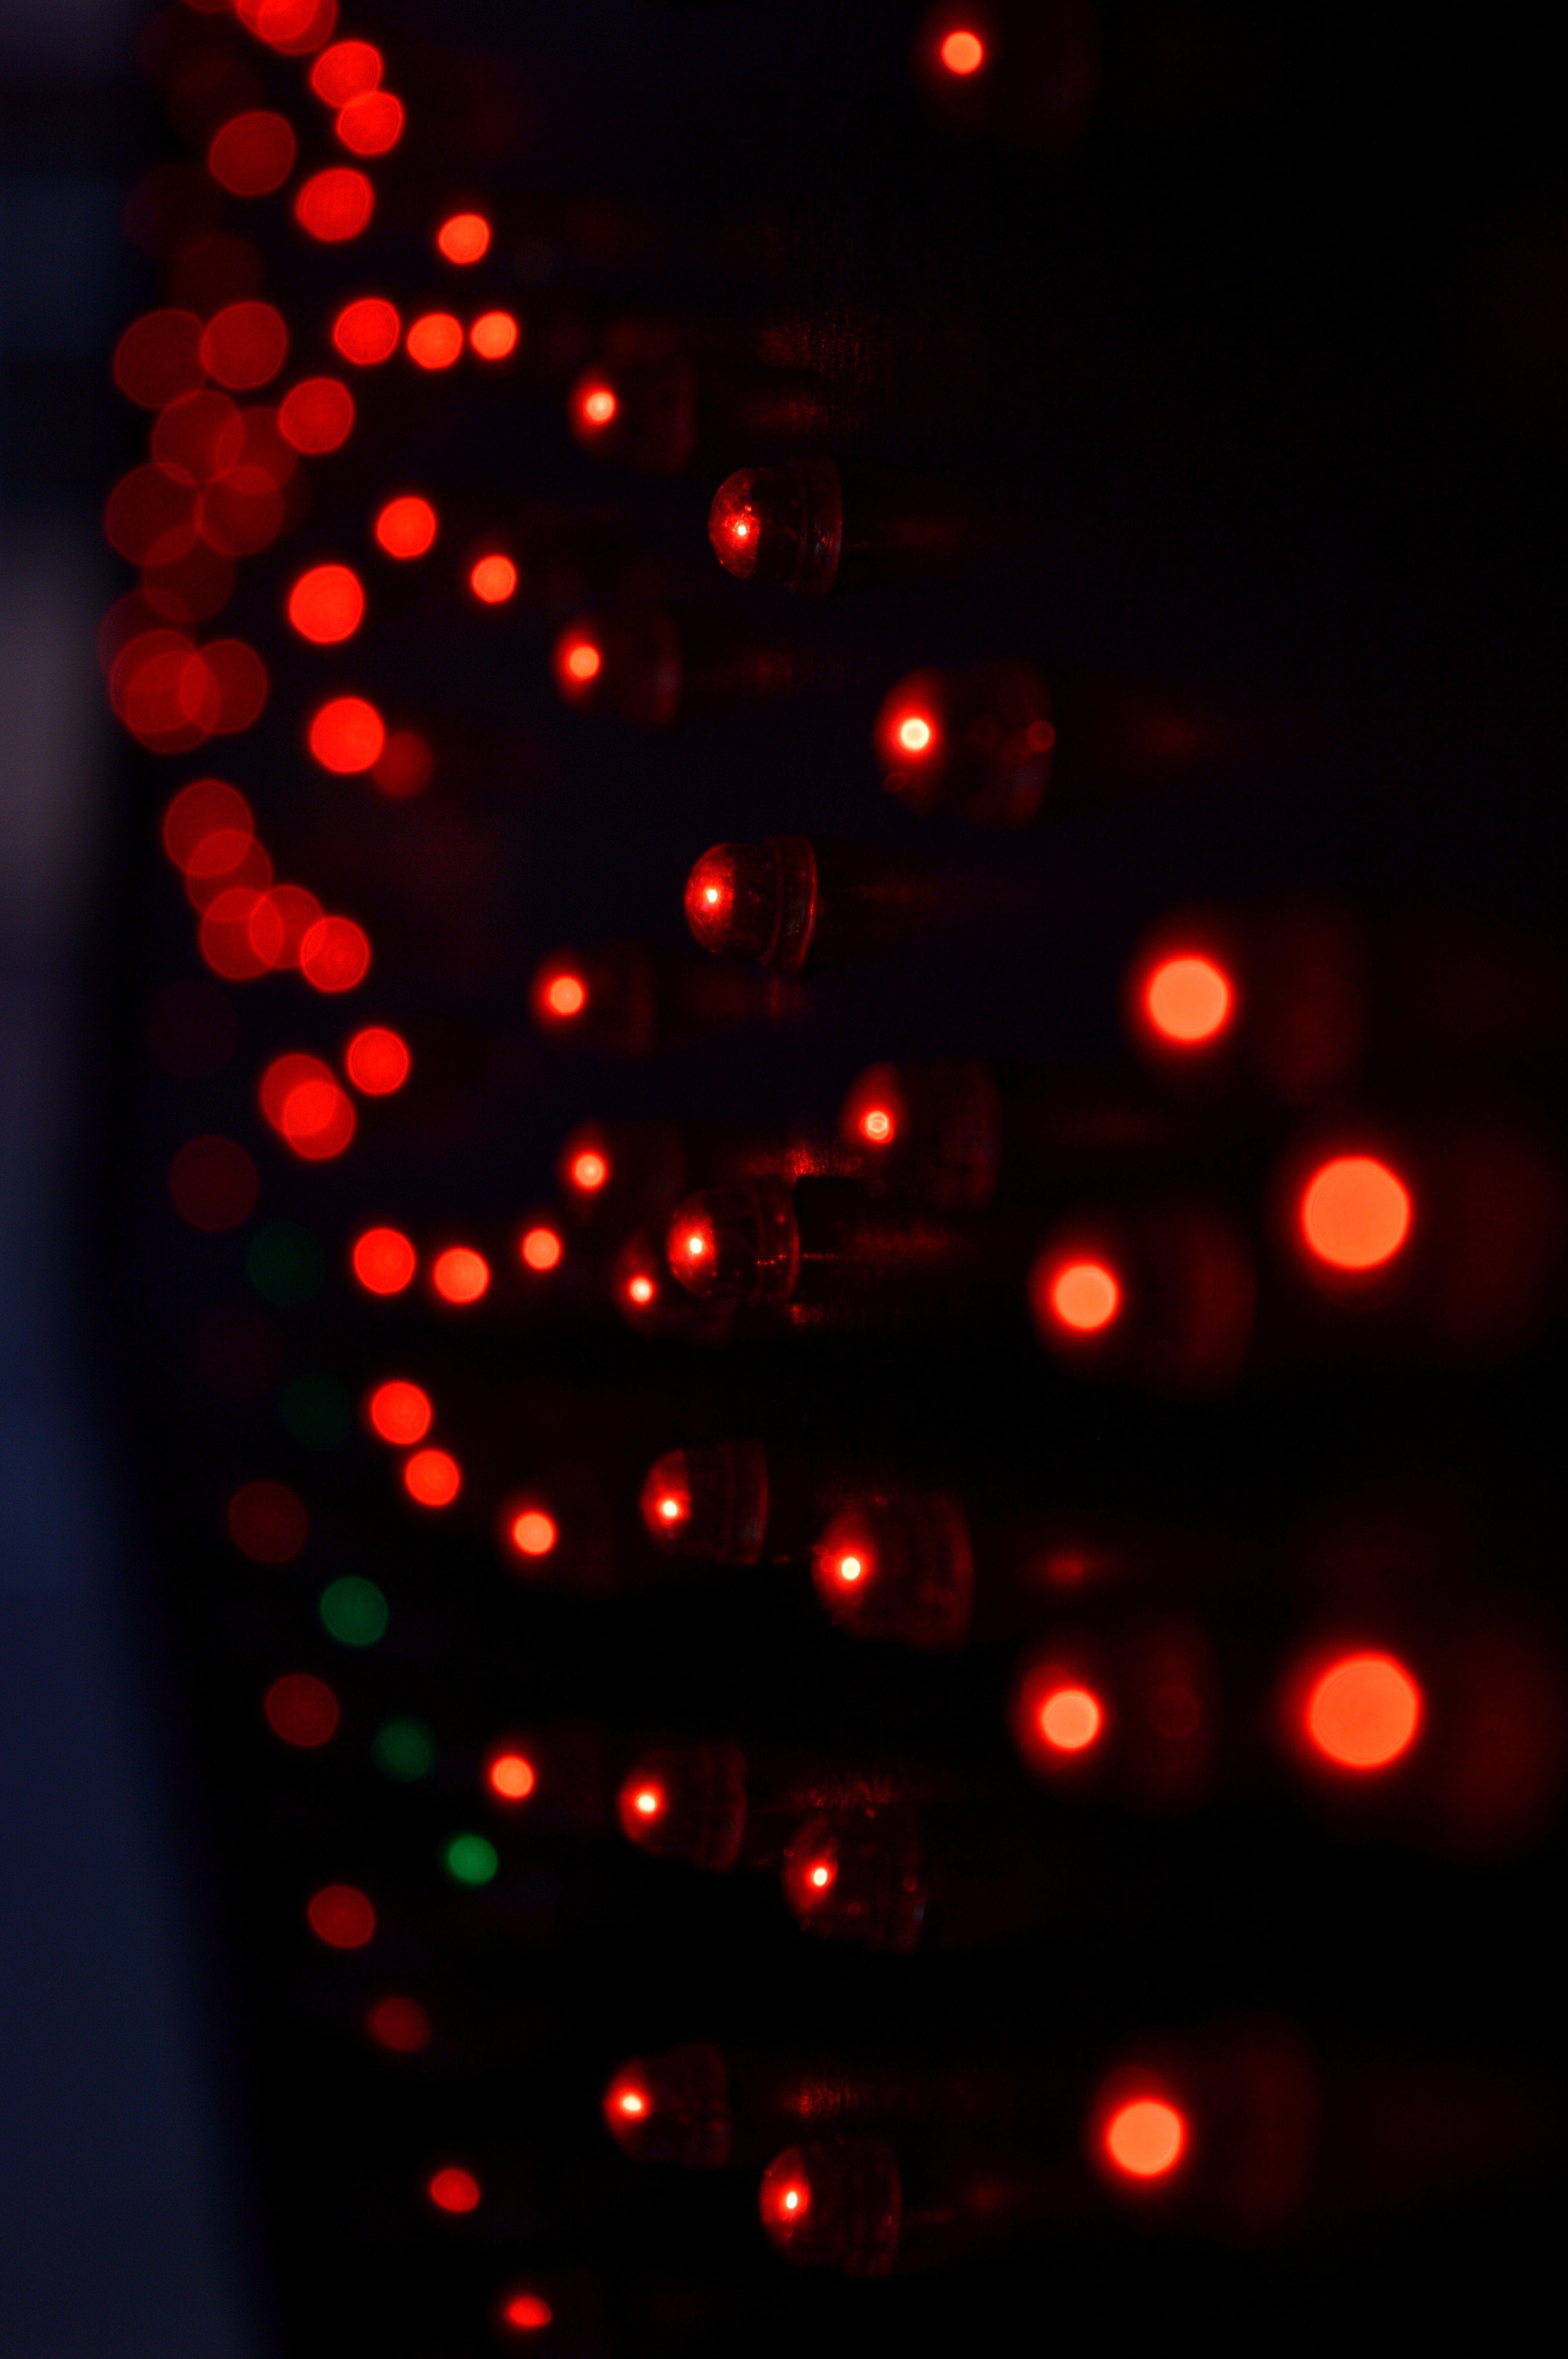 lights blurred red green leds wallpaper and background